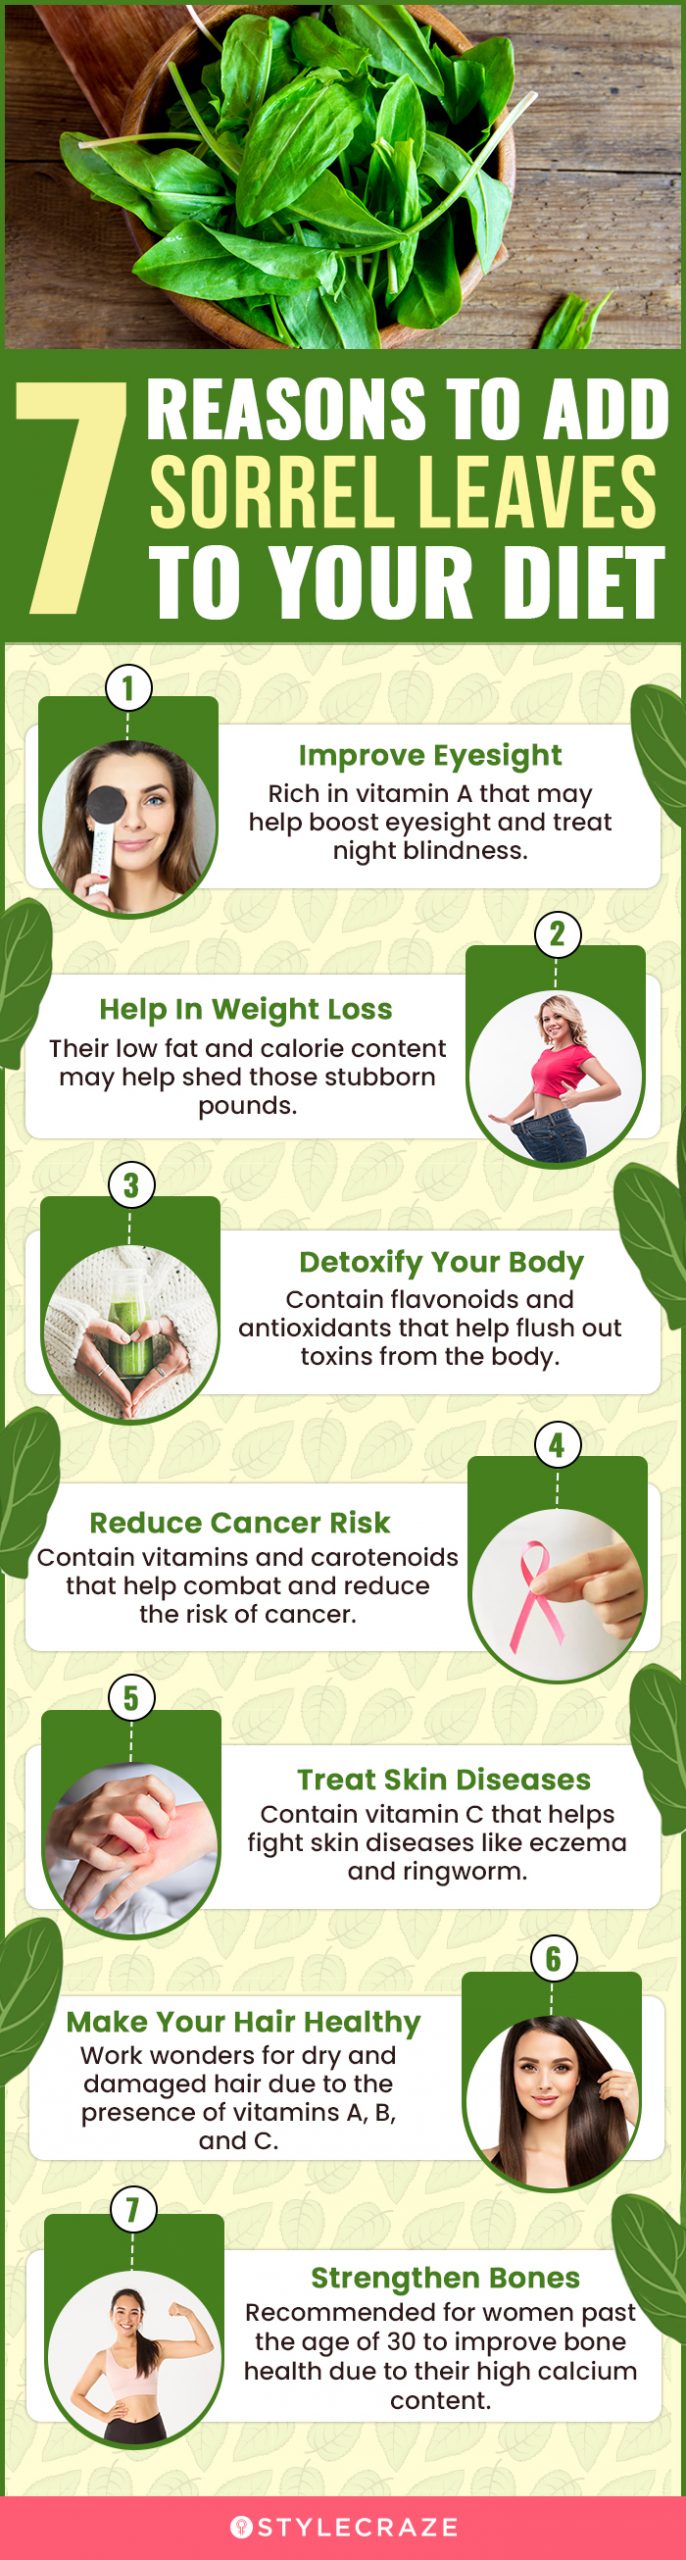 7 reasons to add sorrel leaves to your diet (infographic)